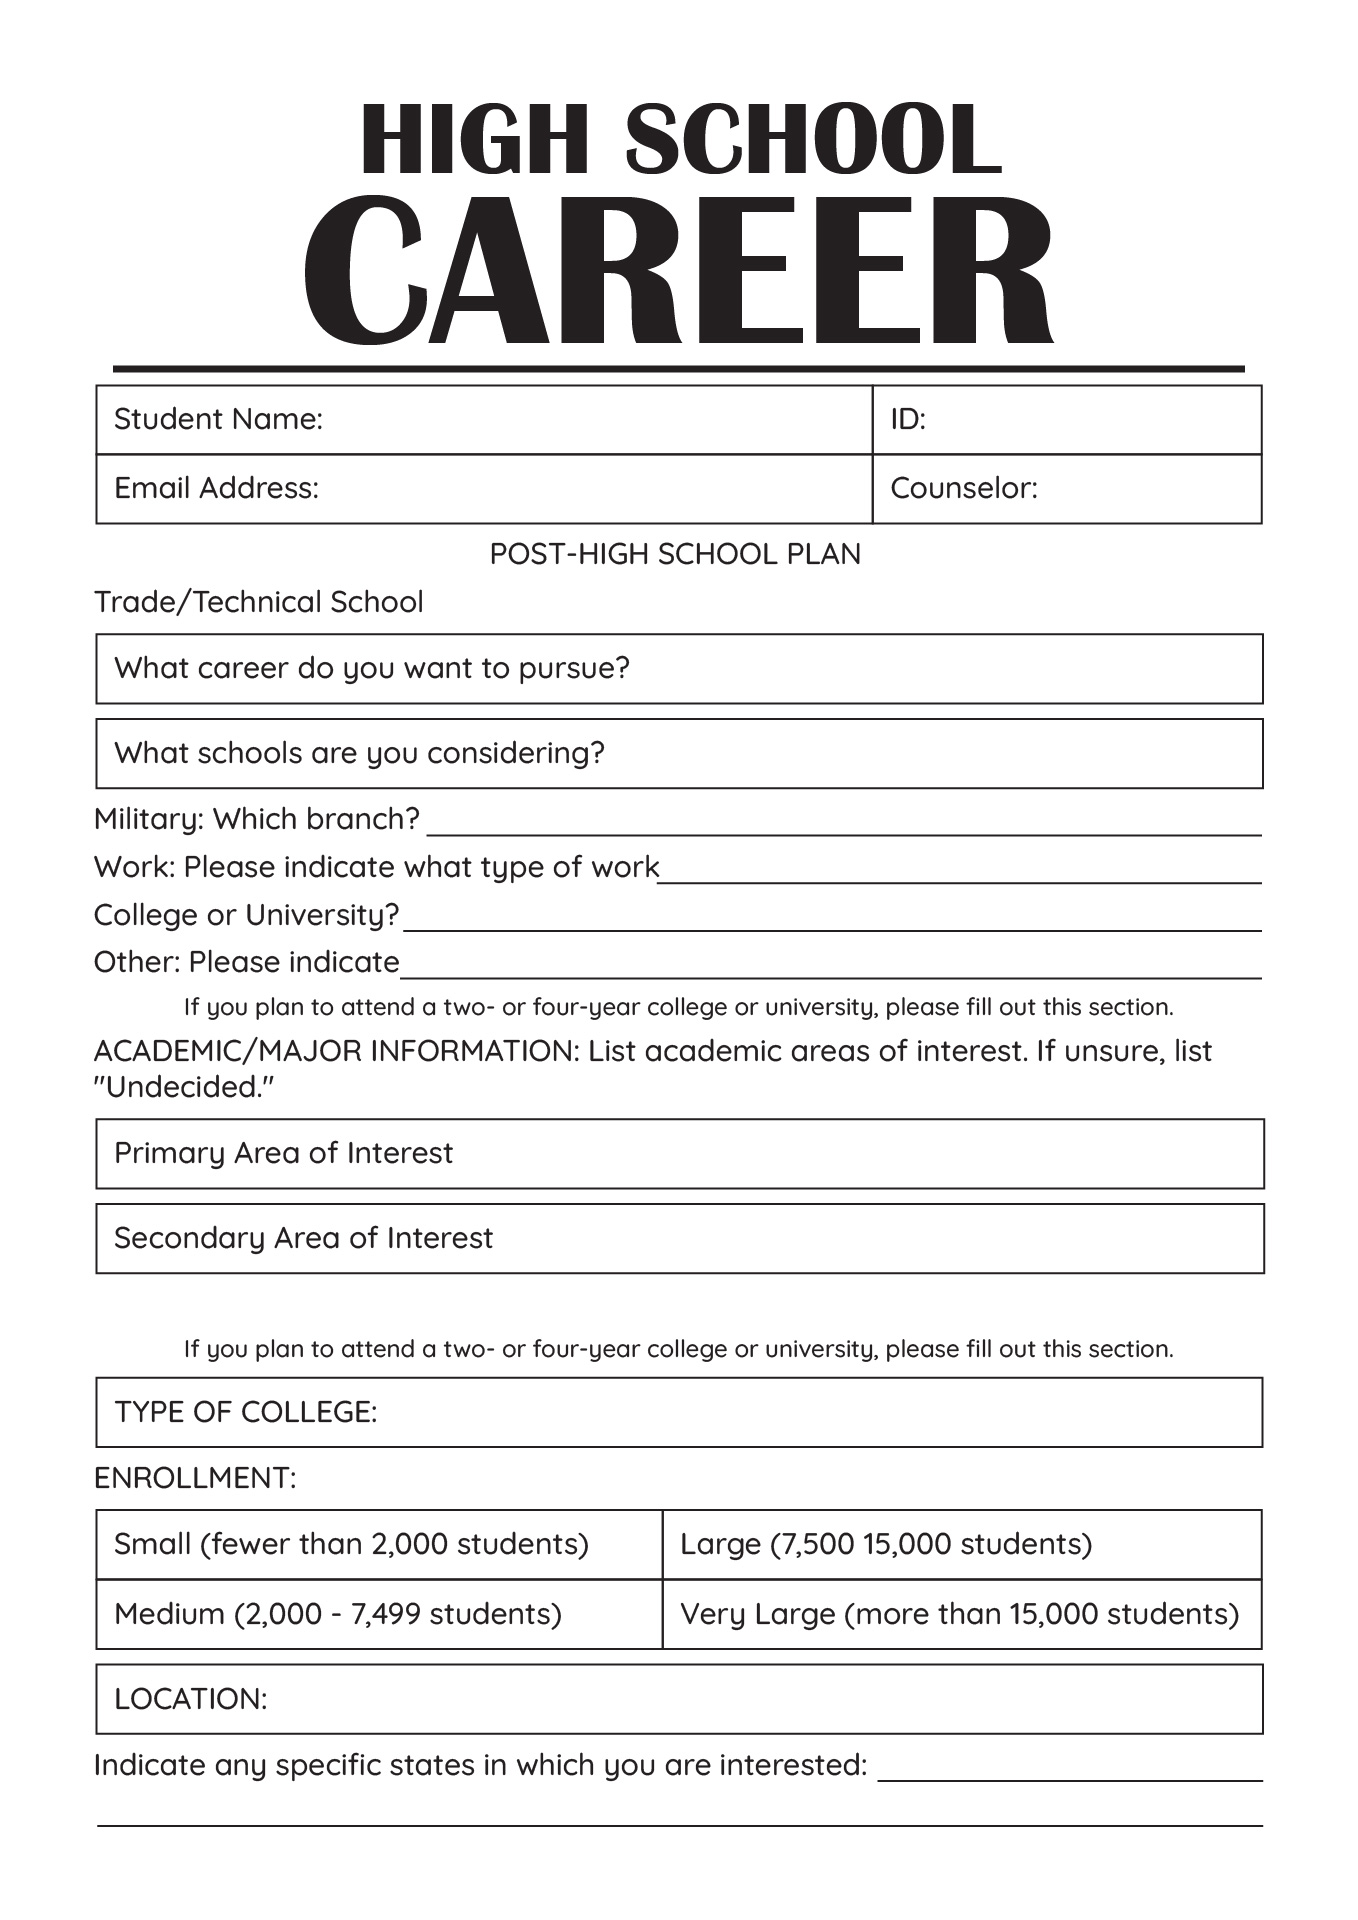 High School Career Worksheets for Students